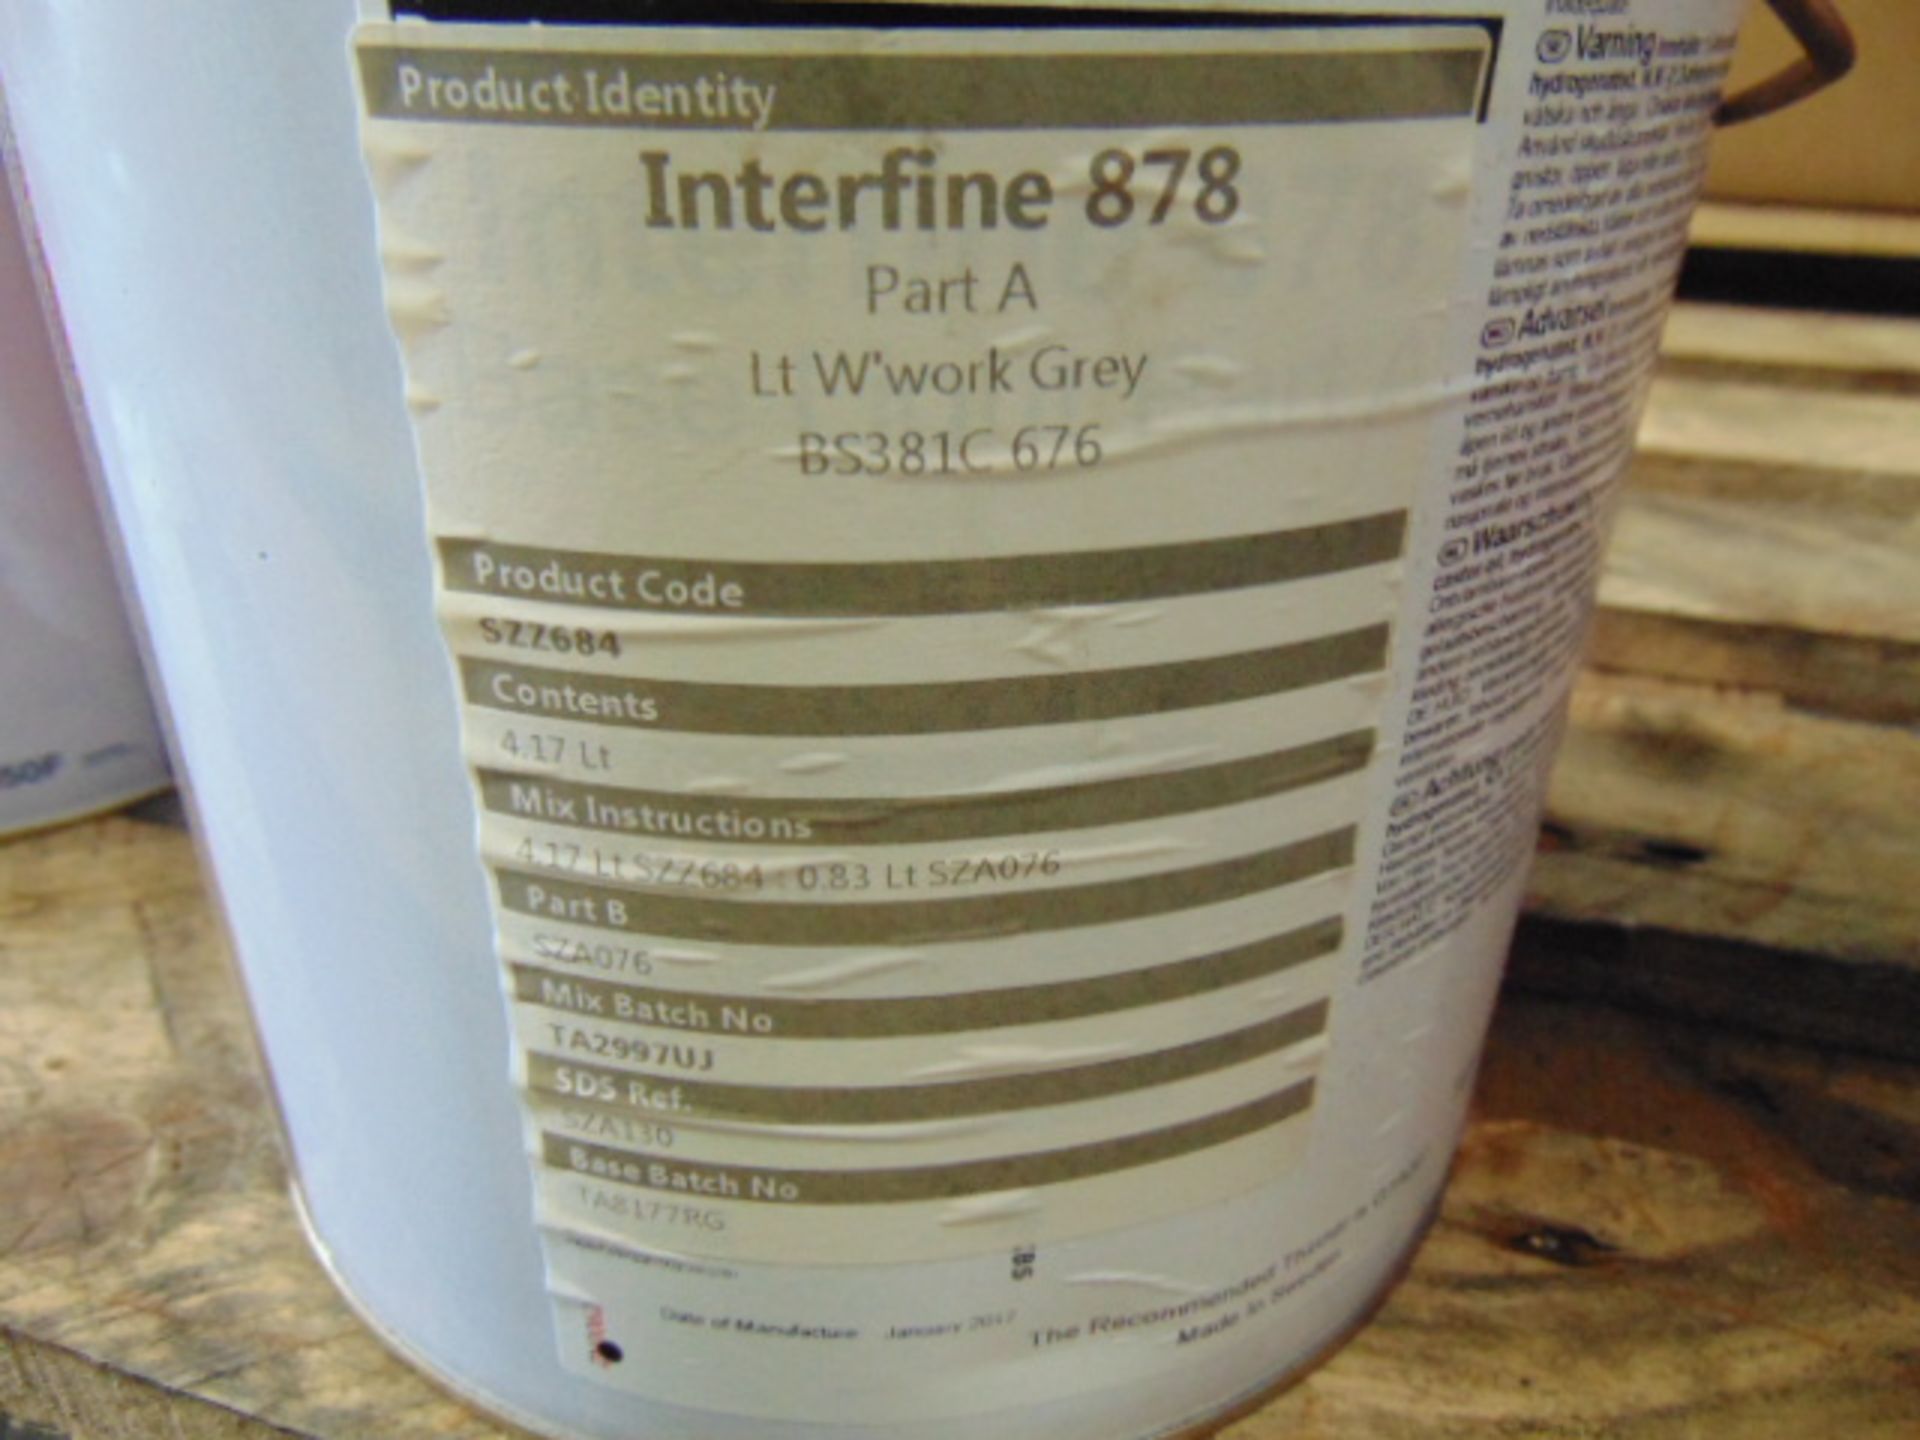 4 x International Interfine 878 2 Pack 5L High Performance Protective Coating paint - Image 2 of 3